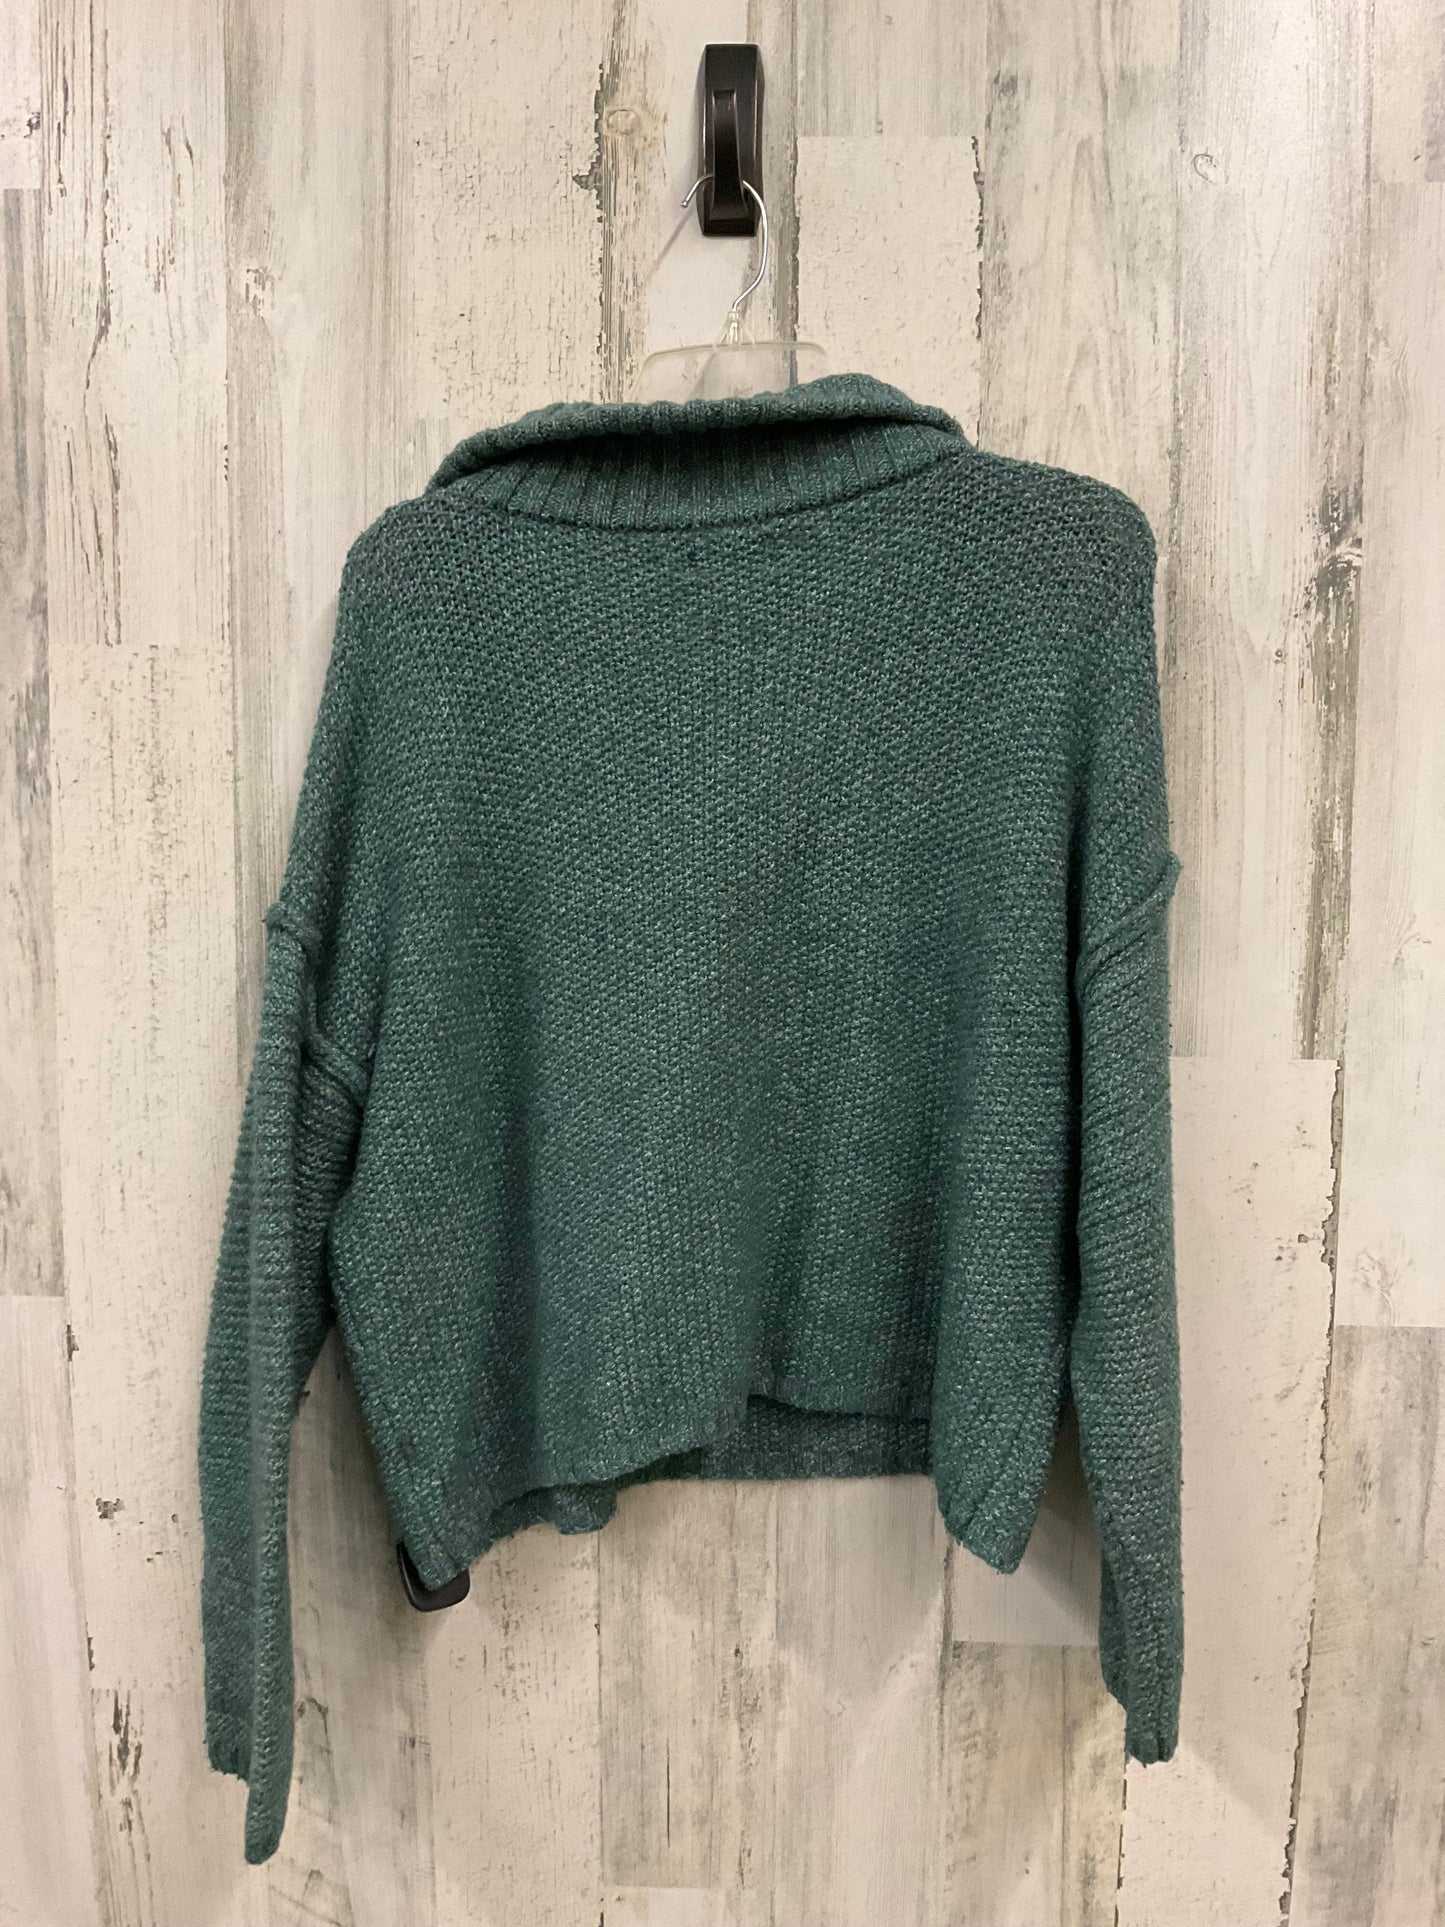 Sweater By Universal Thread  Size: 2x